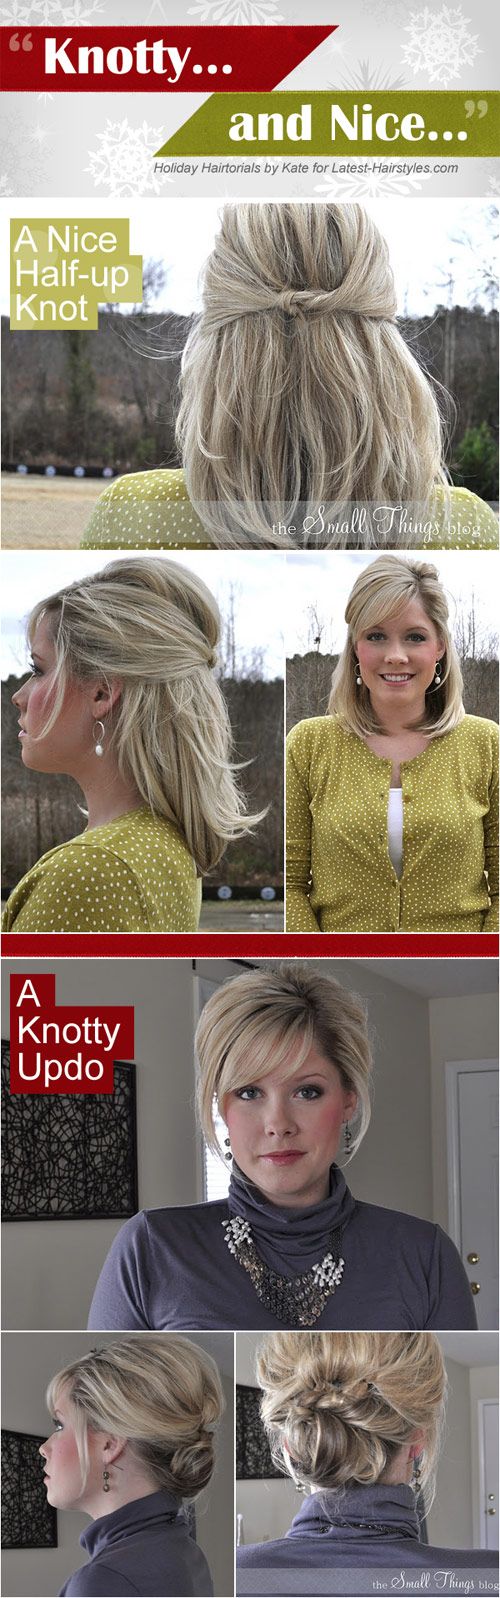 knotty and nice hair tutorial